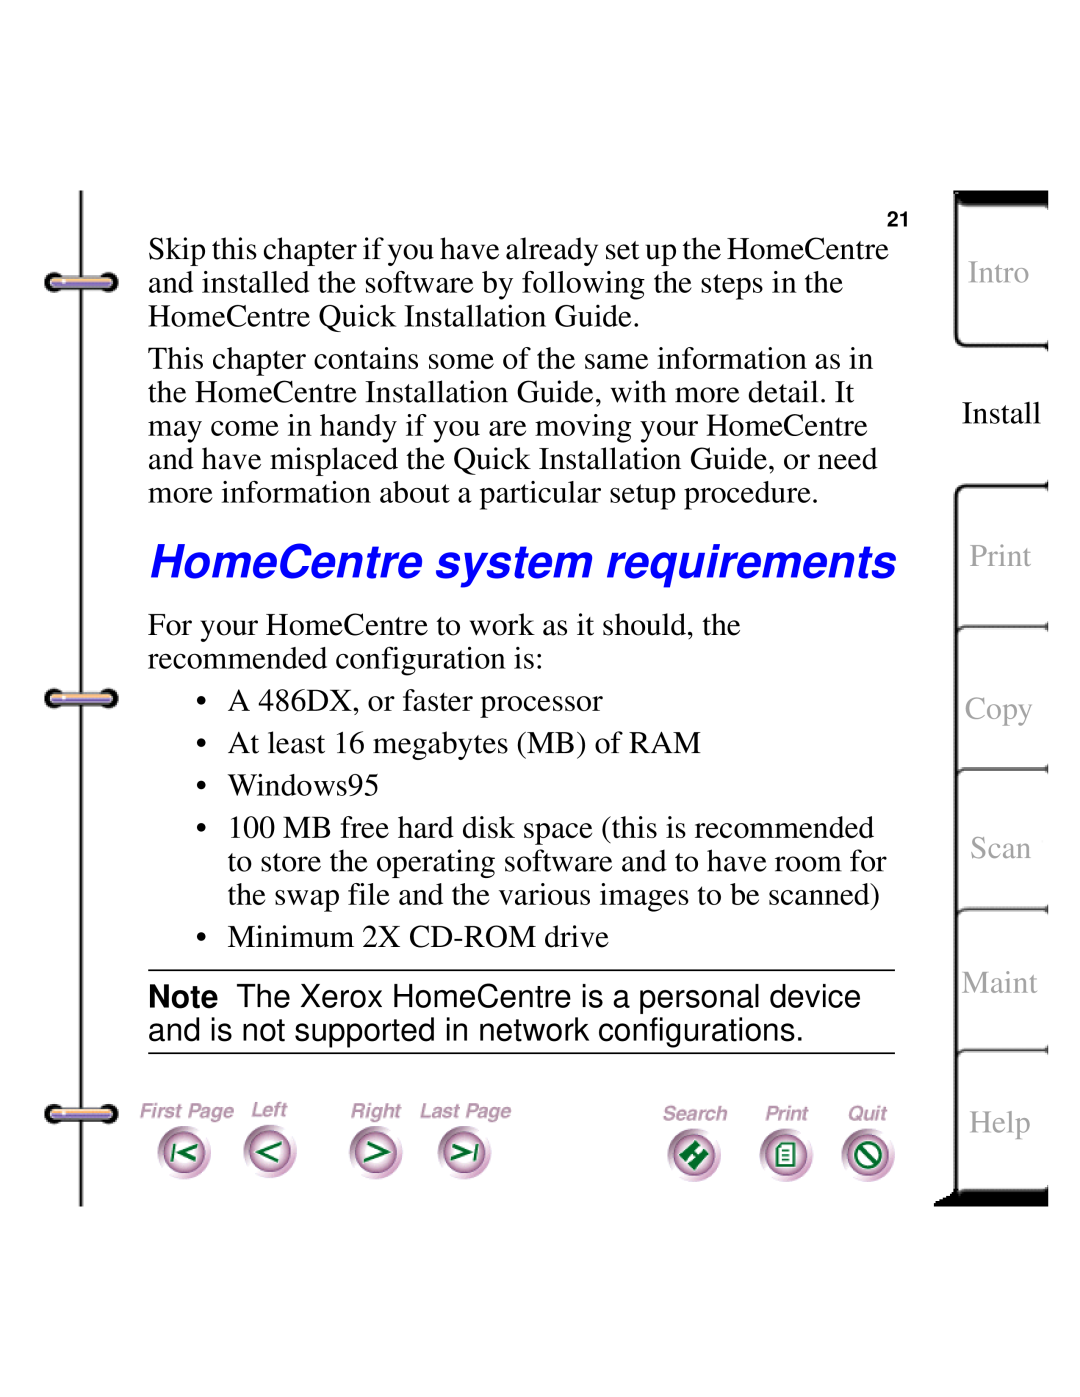 Xerox Document HomeCentre manual HomeCentre system requirements, Intro, Print Copy Scan Maint, Help 